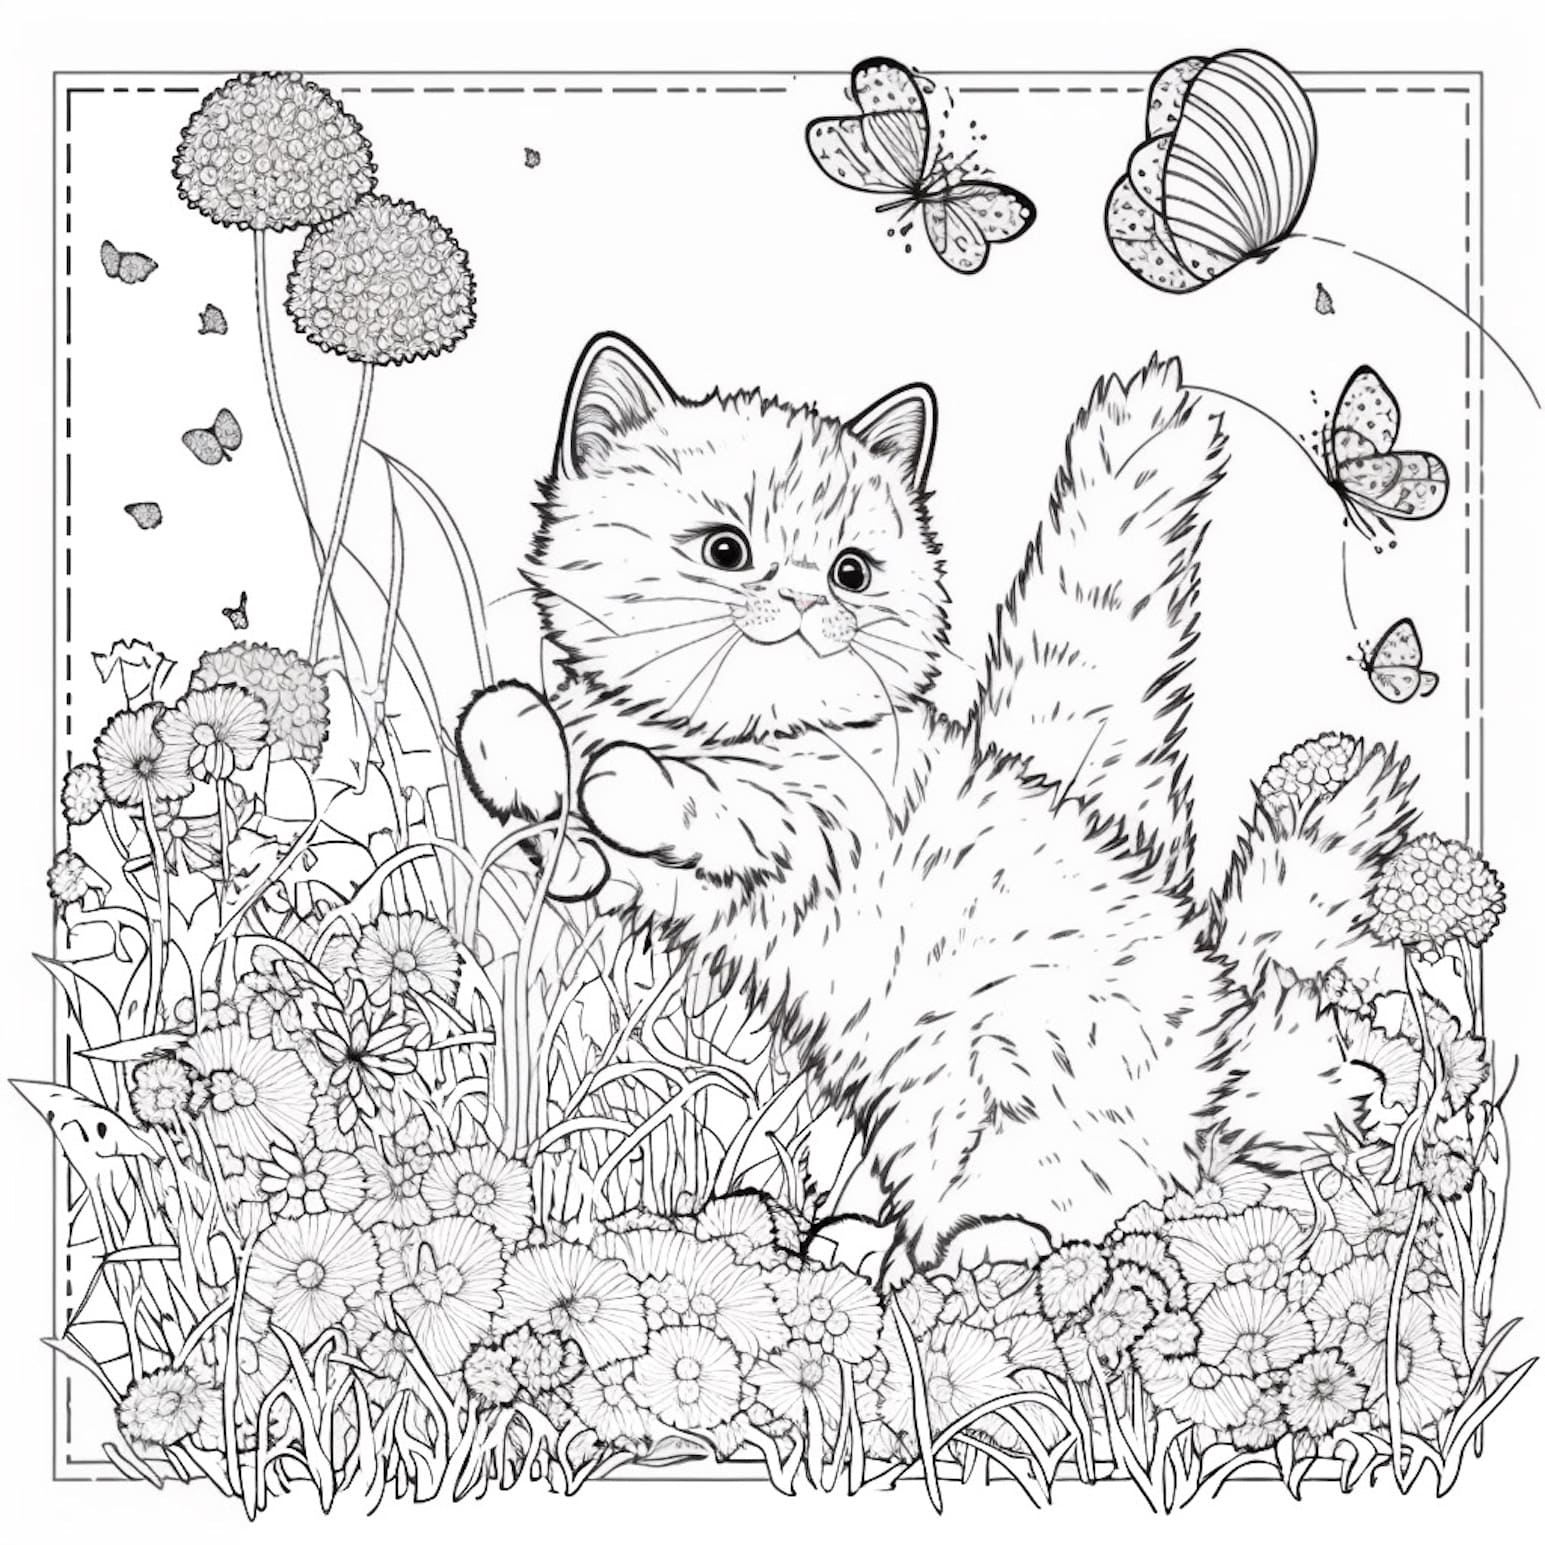 Pencil Box Coloring Page - Get Coloring Pages